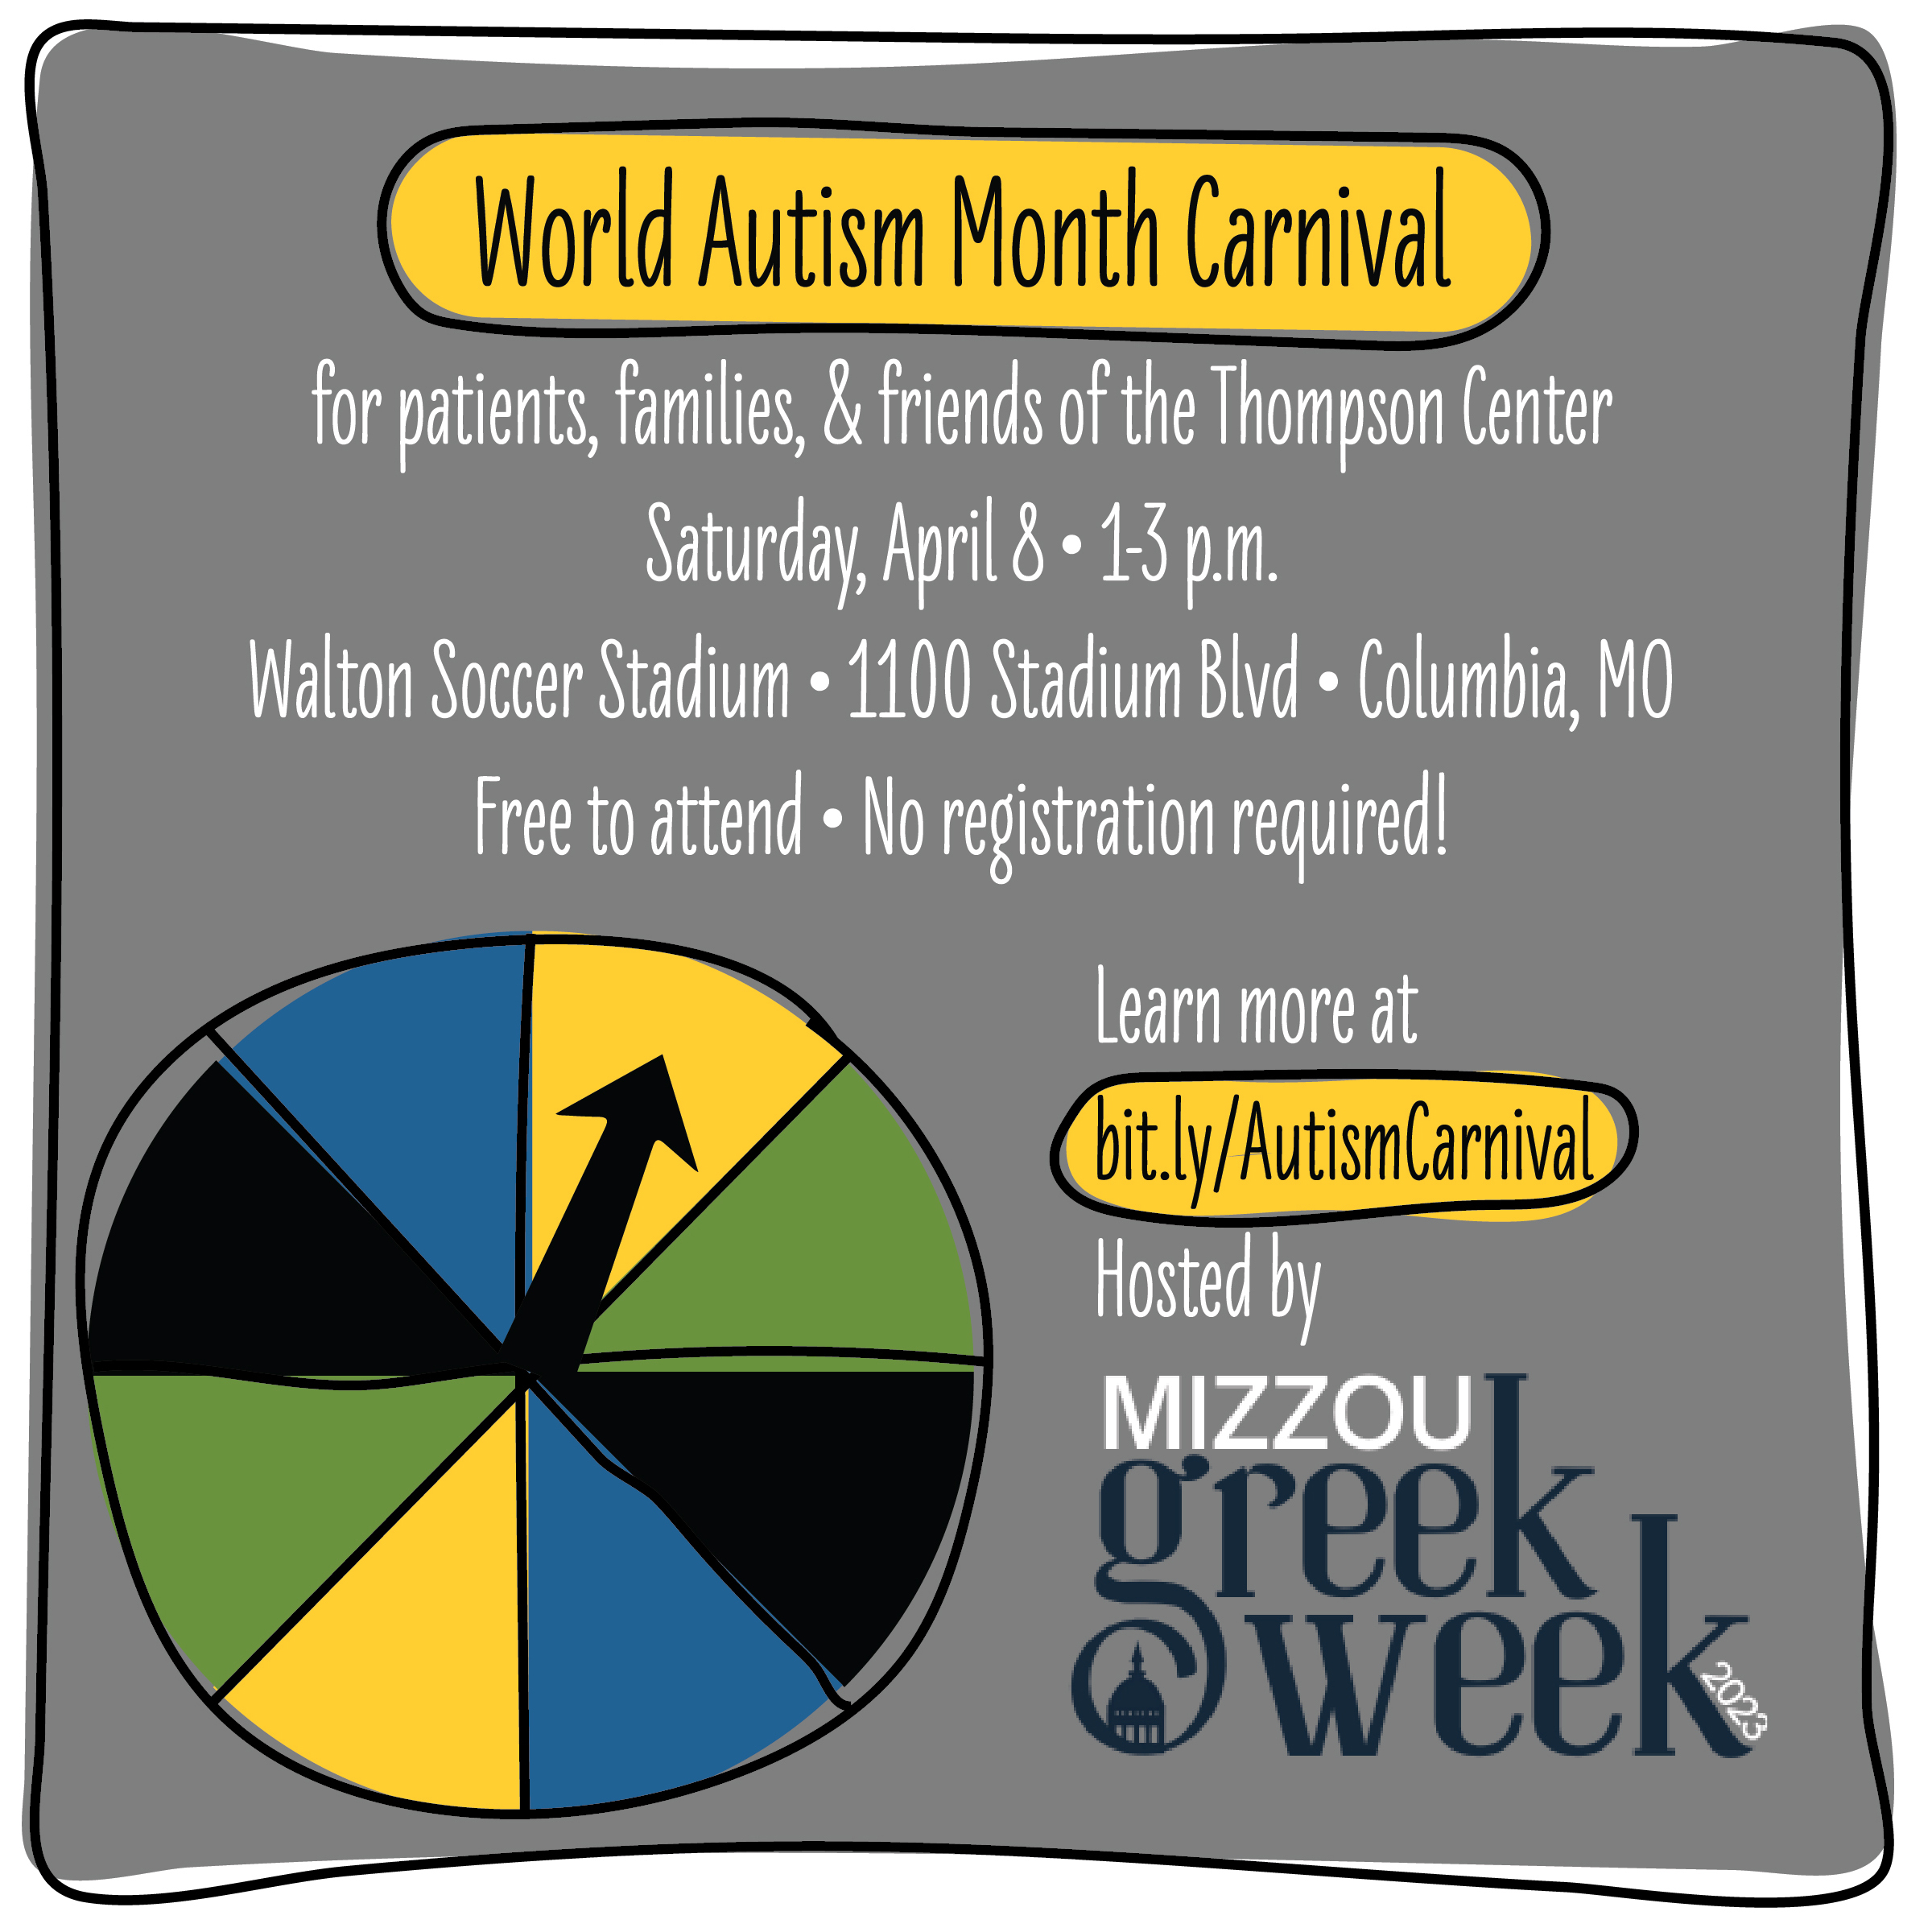 <h1 class="tribe-events-single-event-title">Greek Week Carnival and Mizzou Baseball to celebrate World Autism Month</h1>